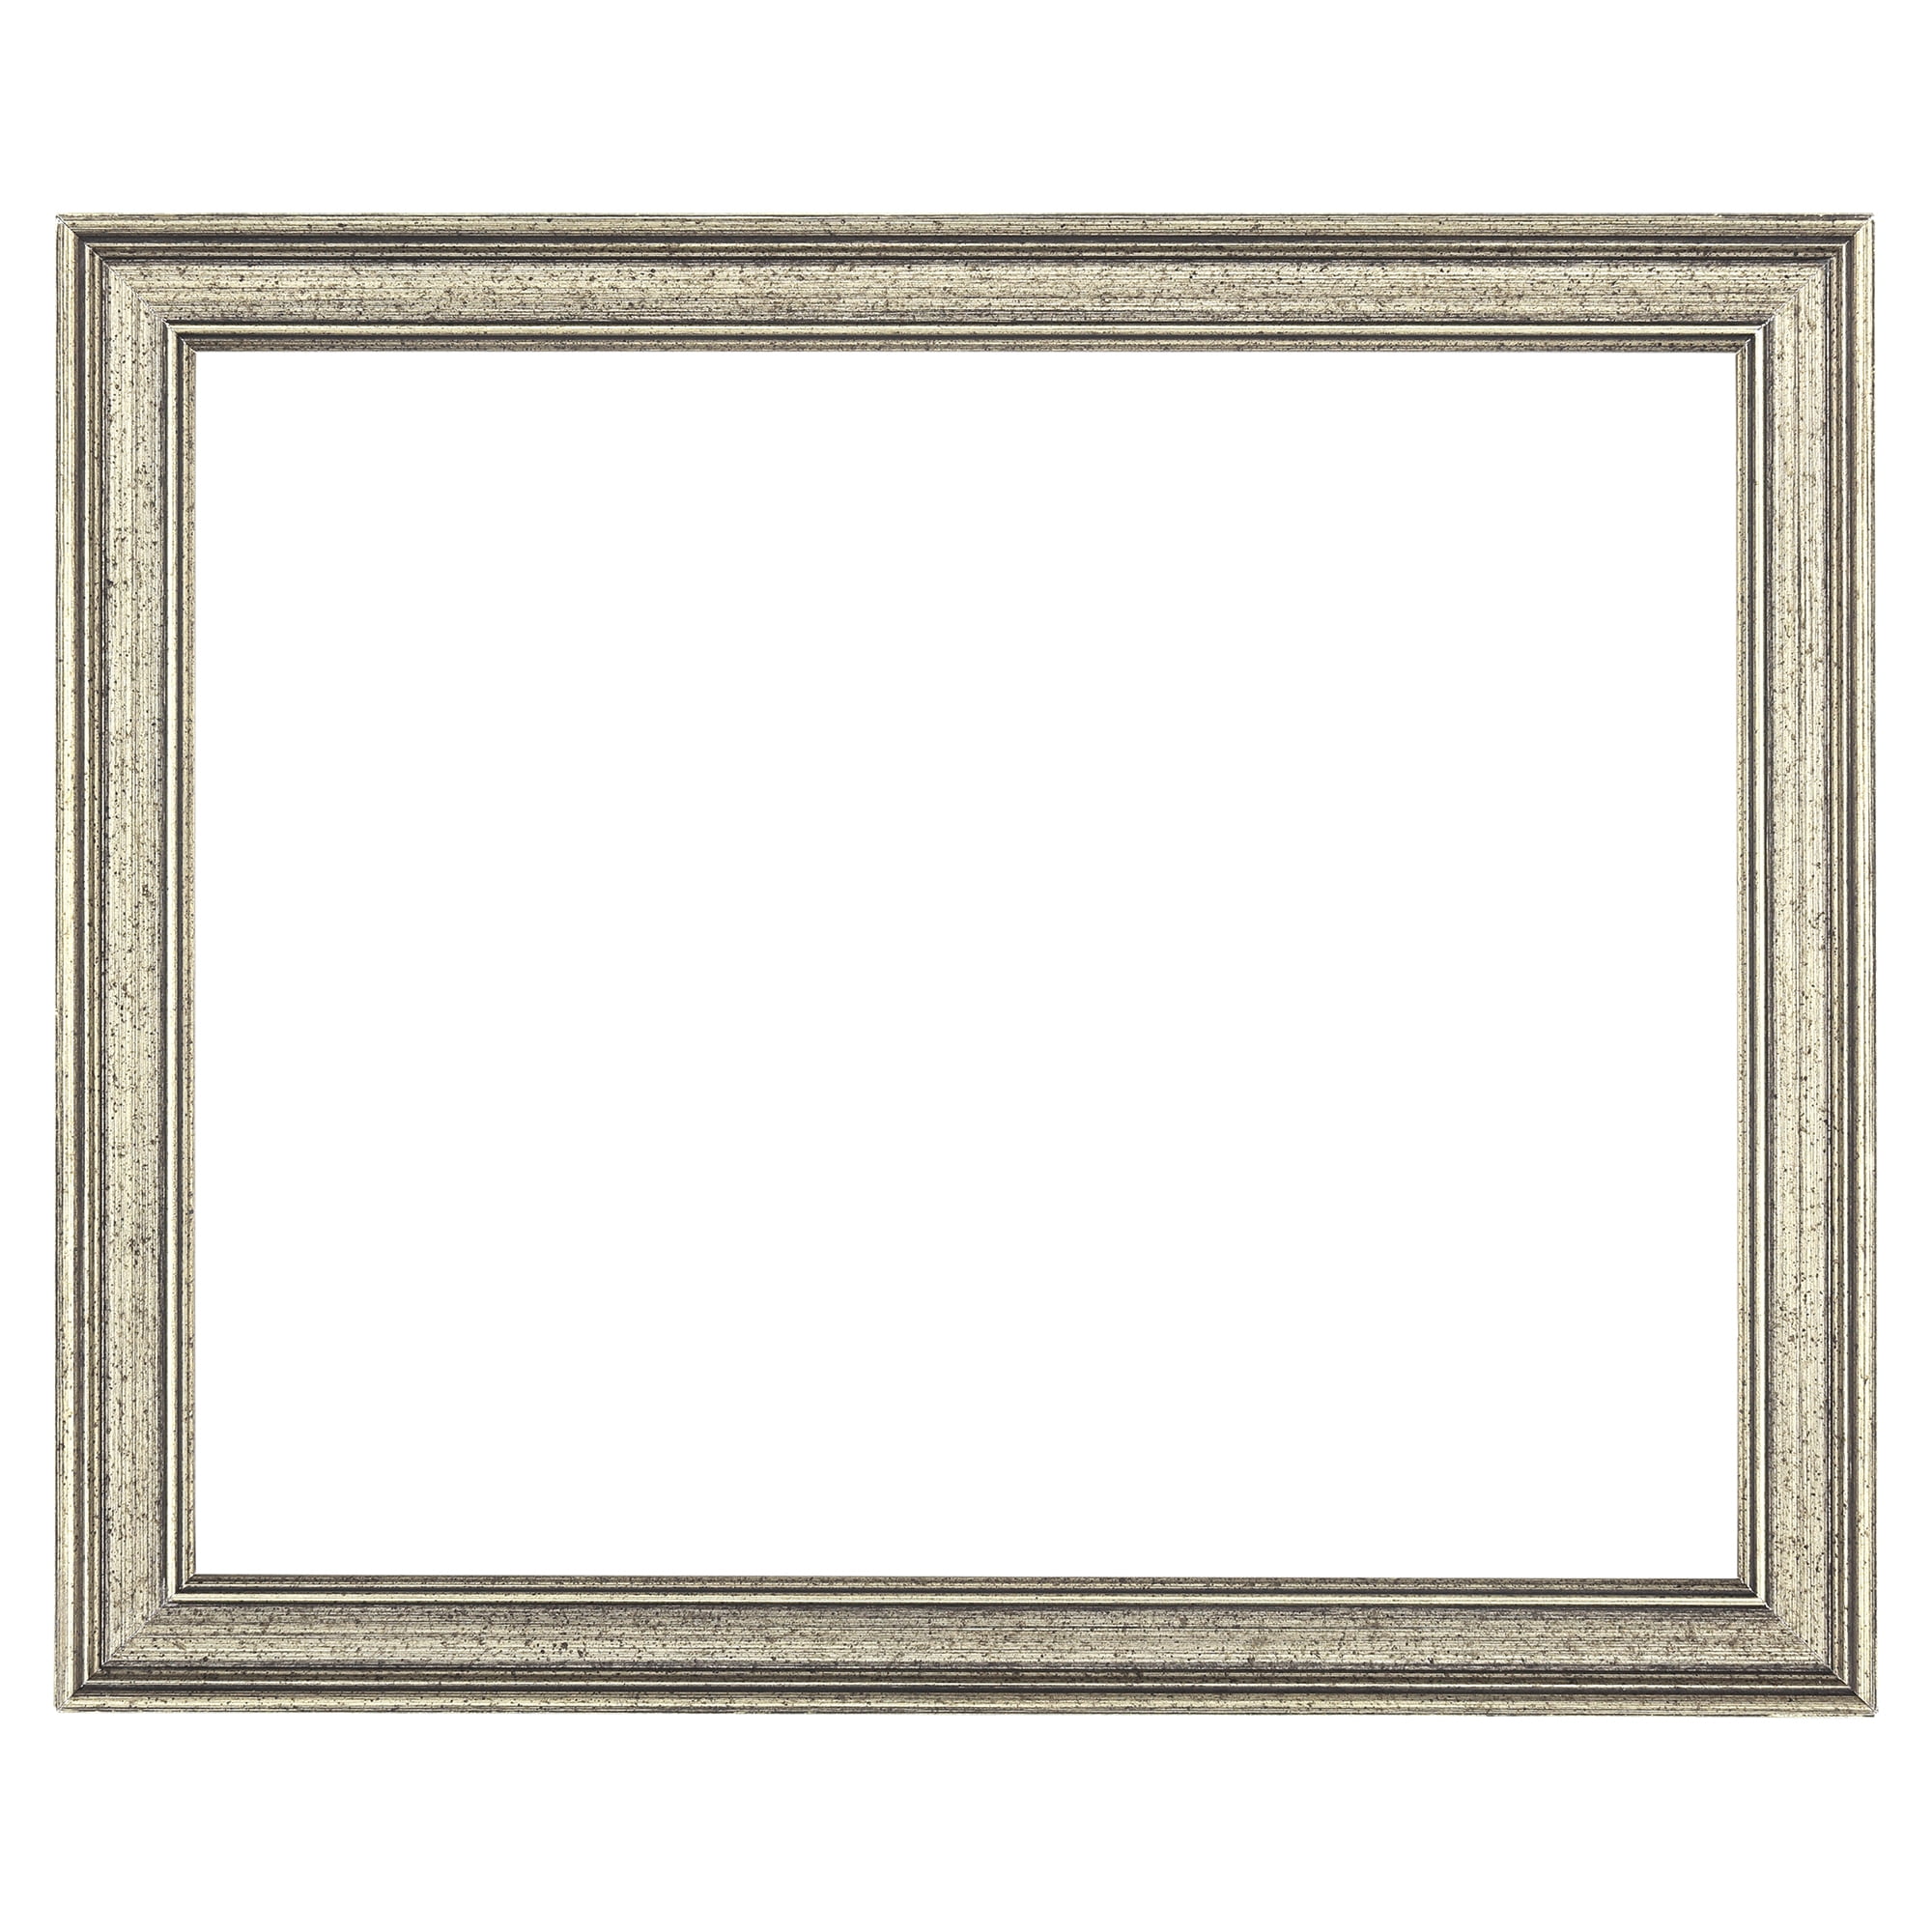 MUseum Collection Piccadilly Artist Vintage Picture Frames - 16x20